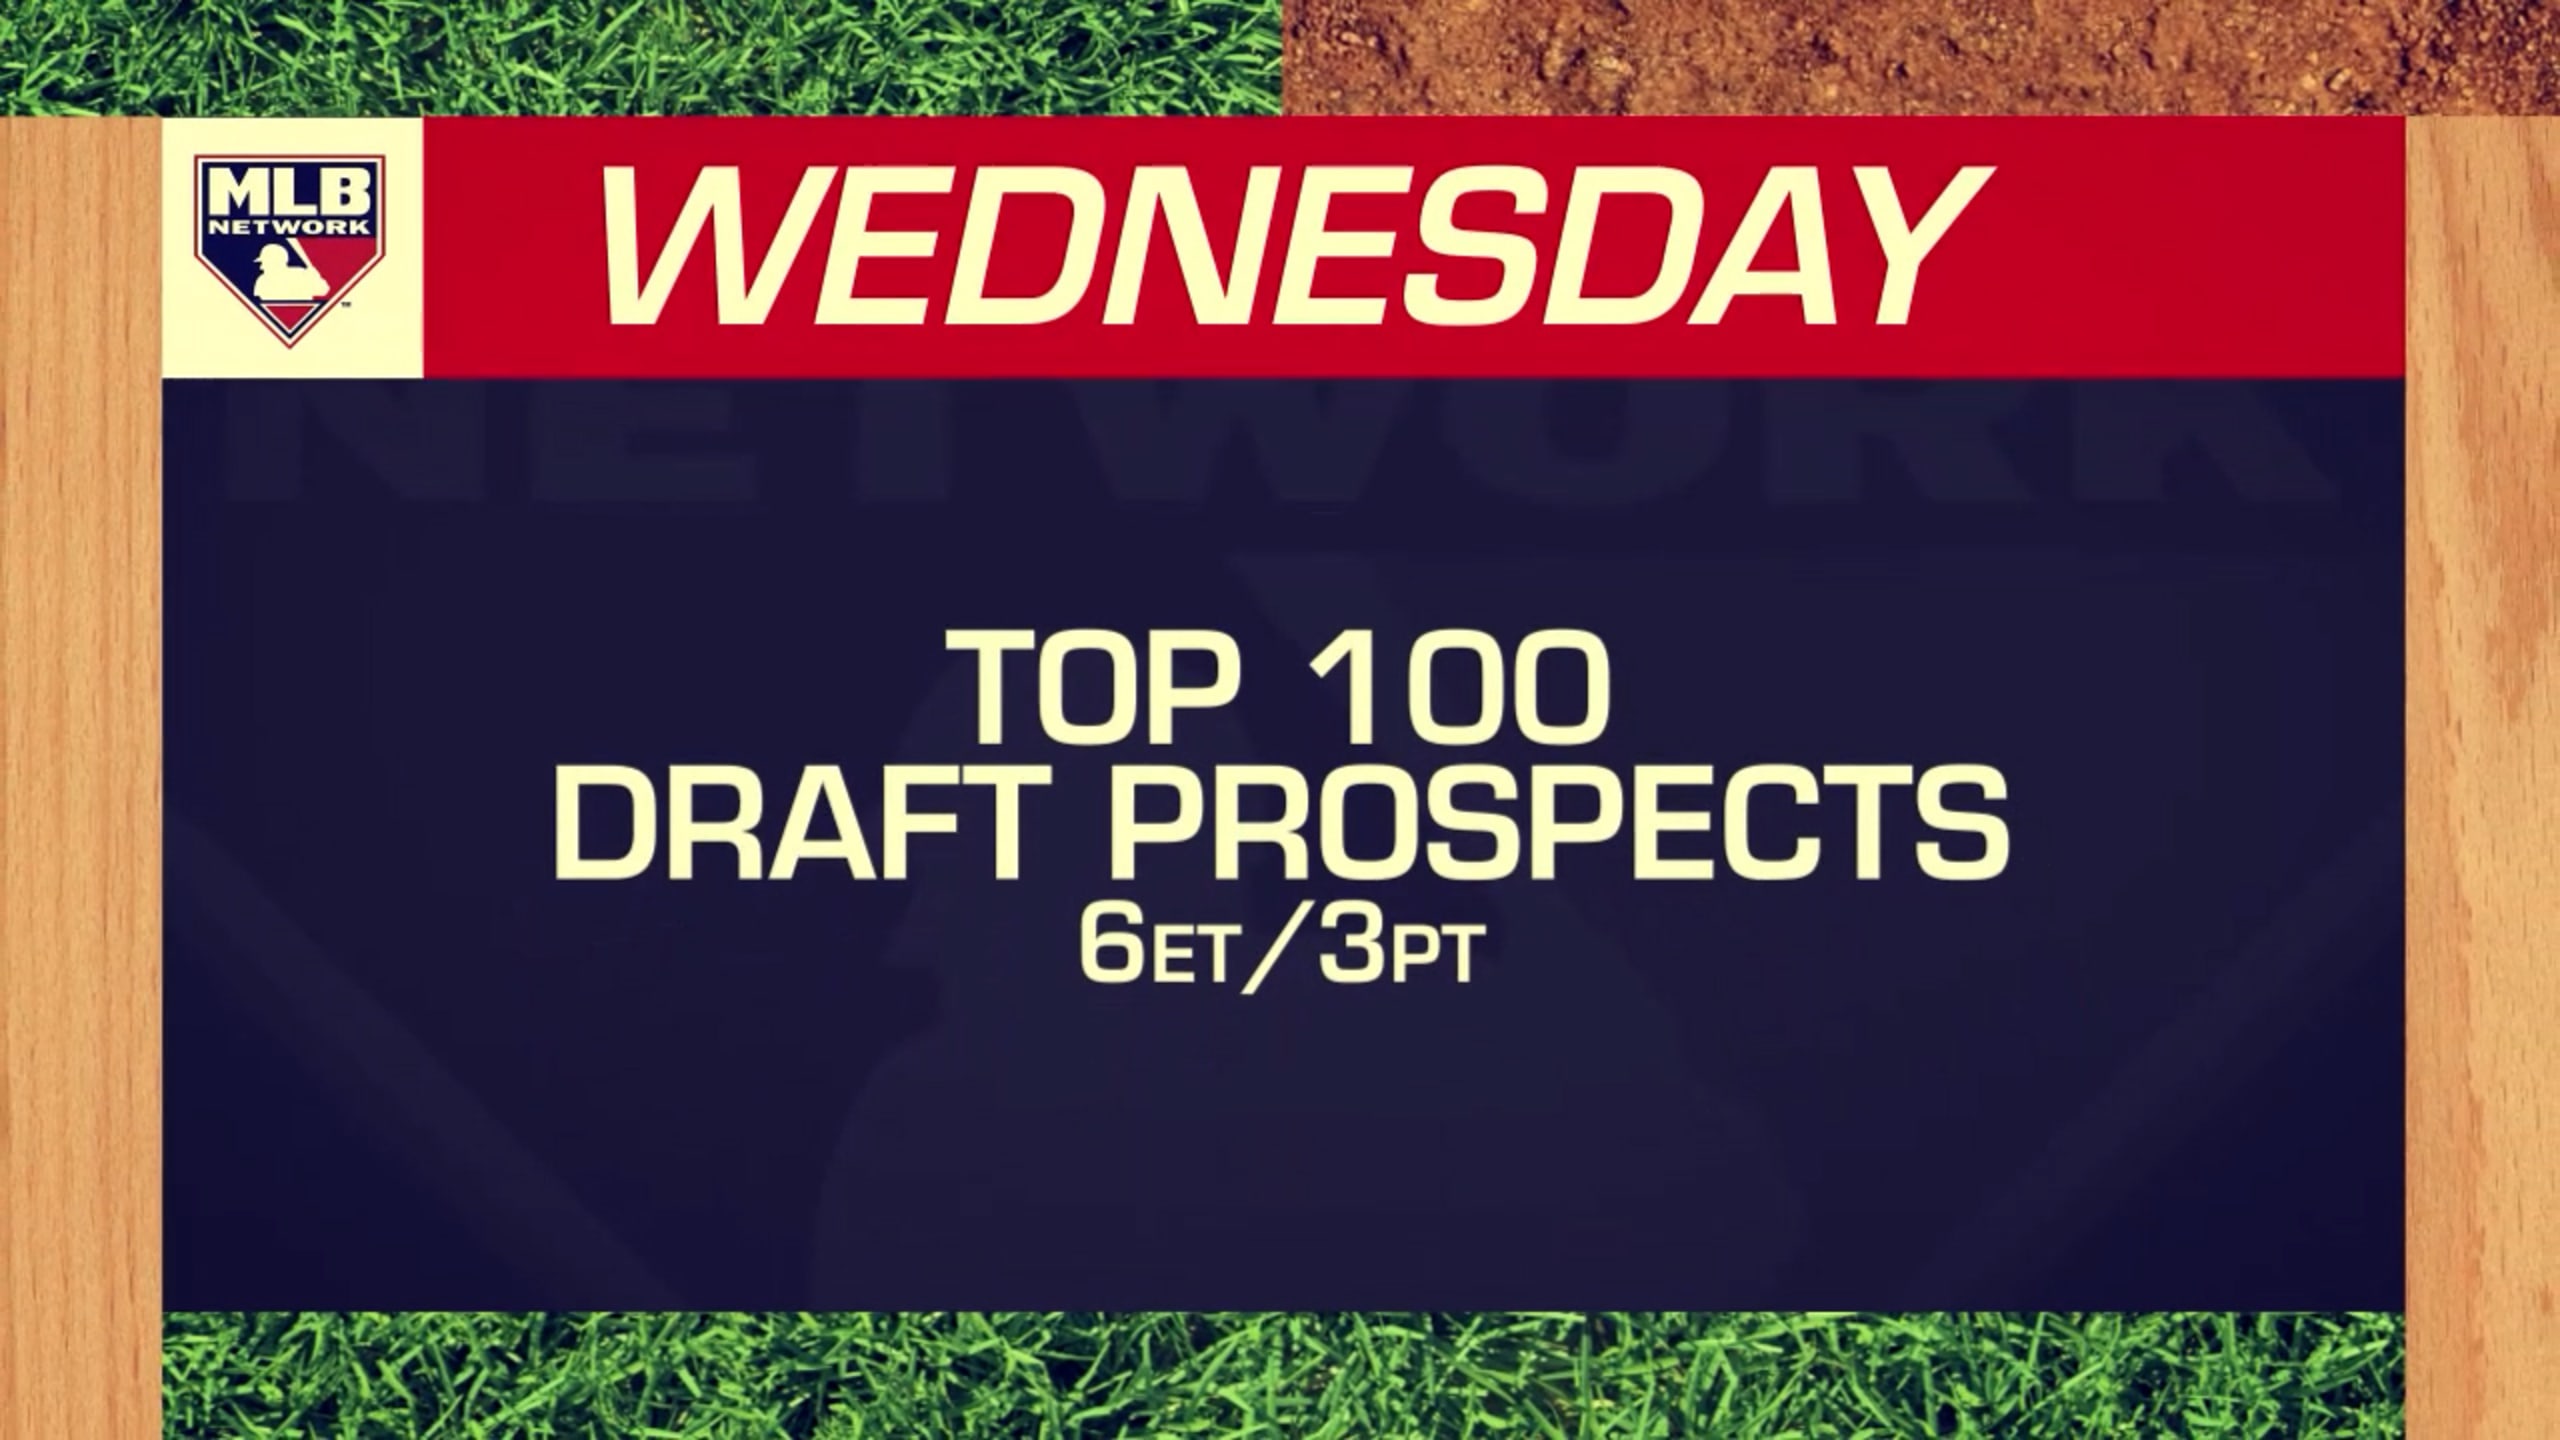 Top 100 Draft Prospects Show